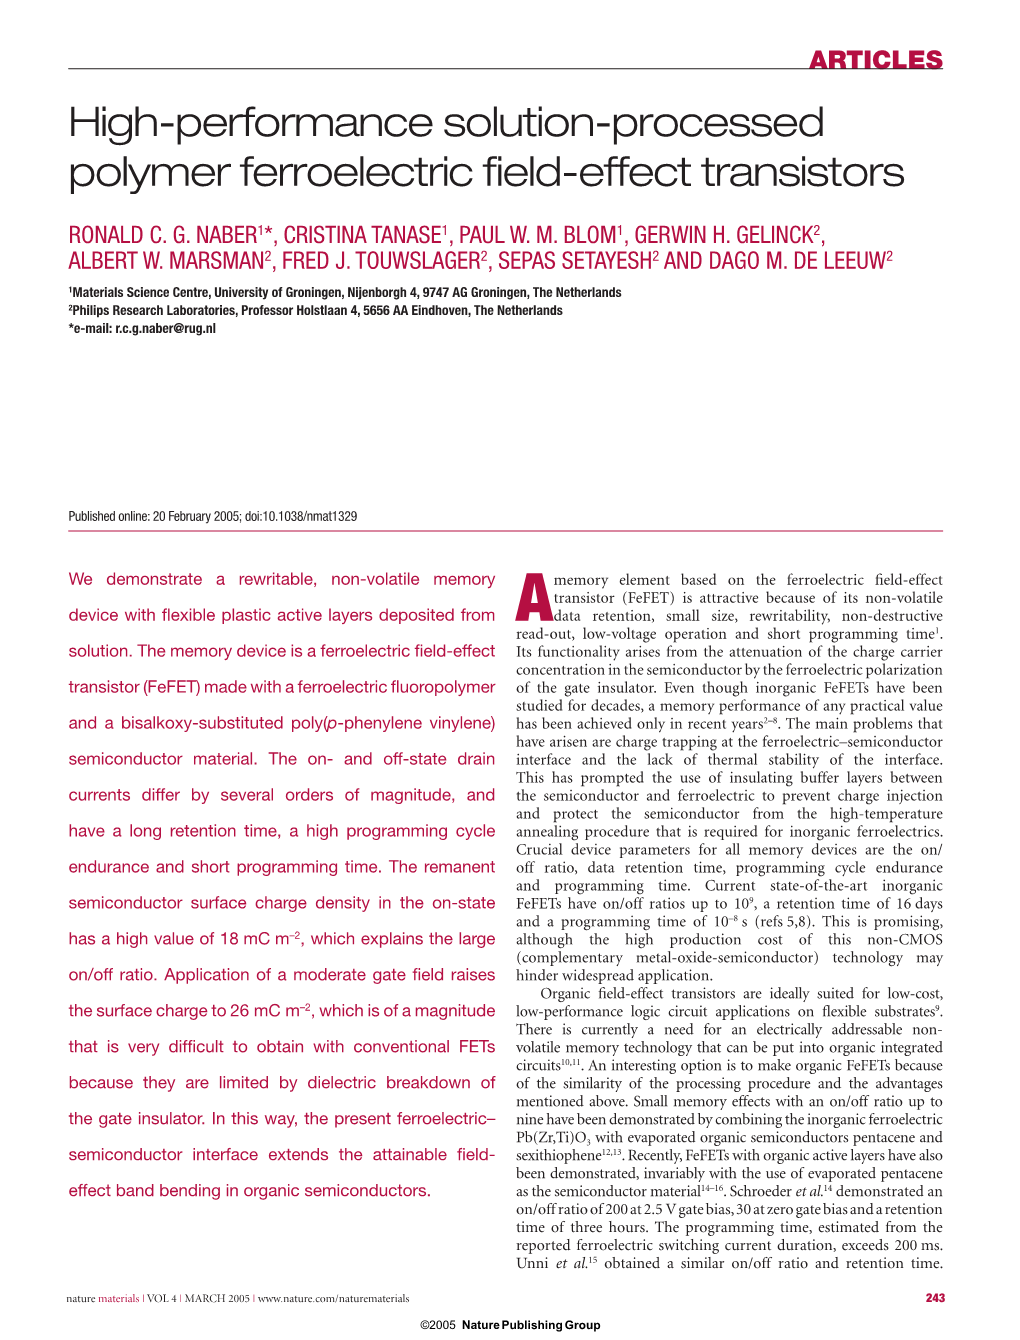 High-Performance Solution-Processed Polymer Ferroelectric Field-Effect